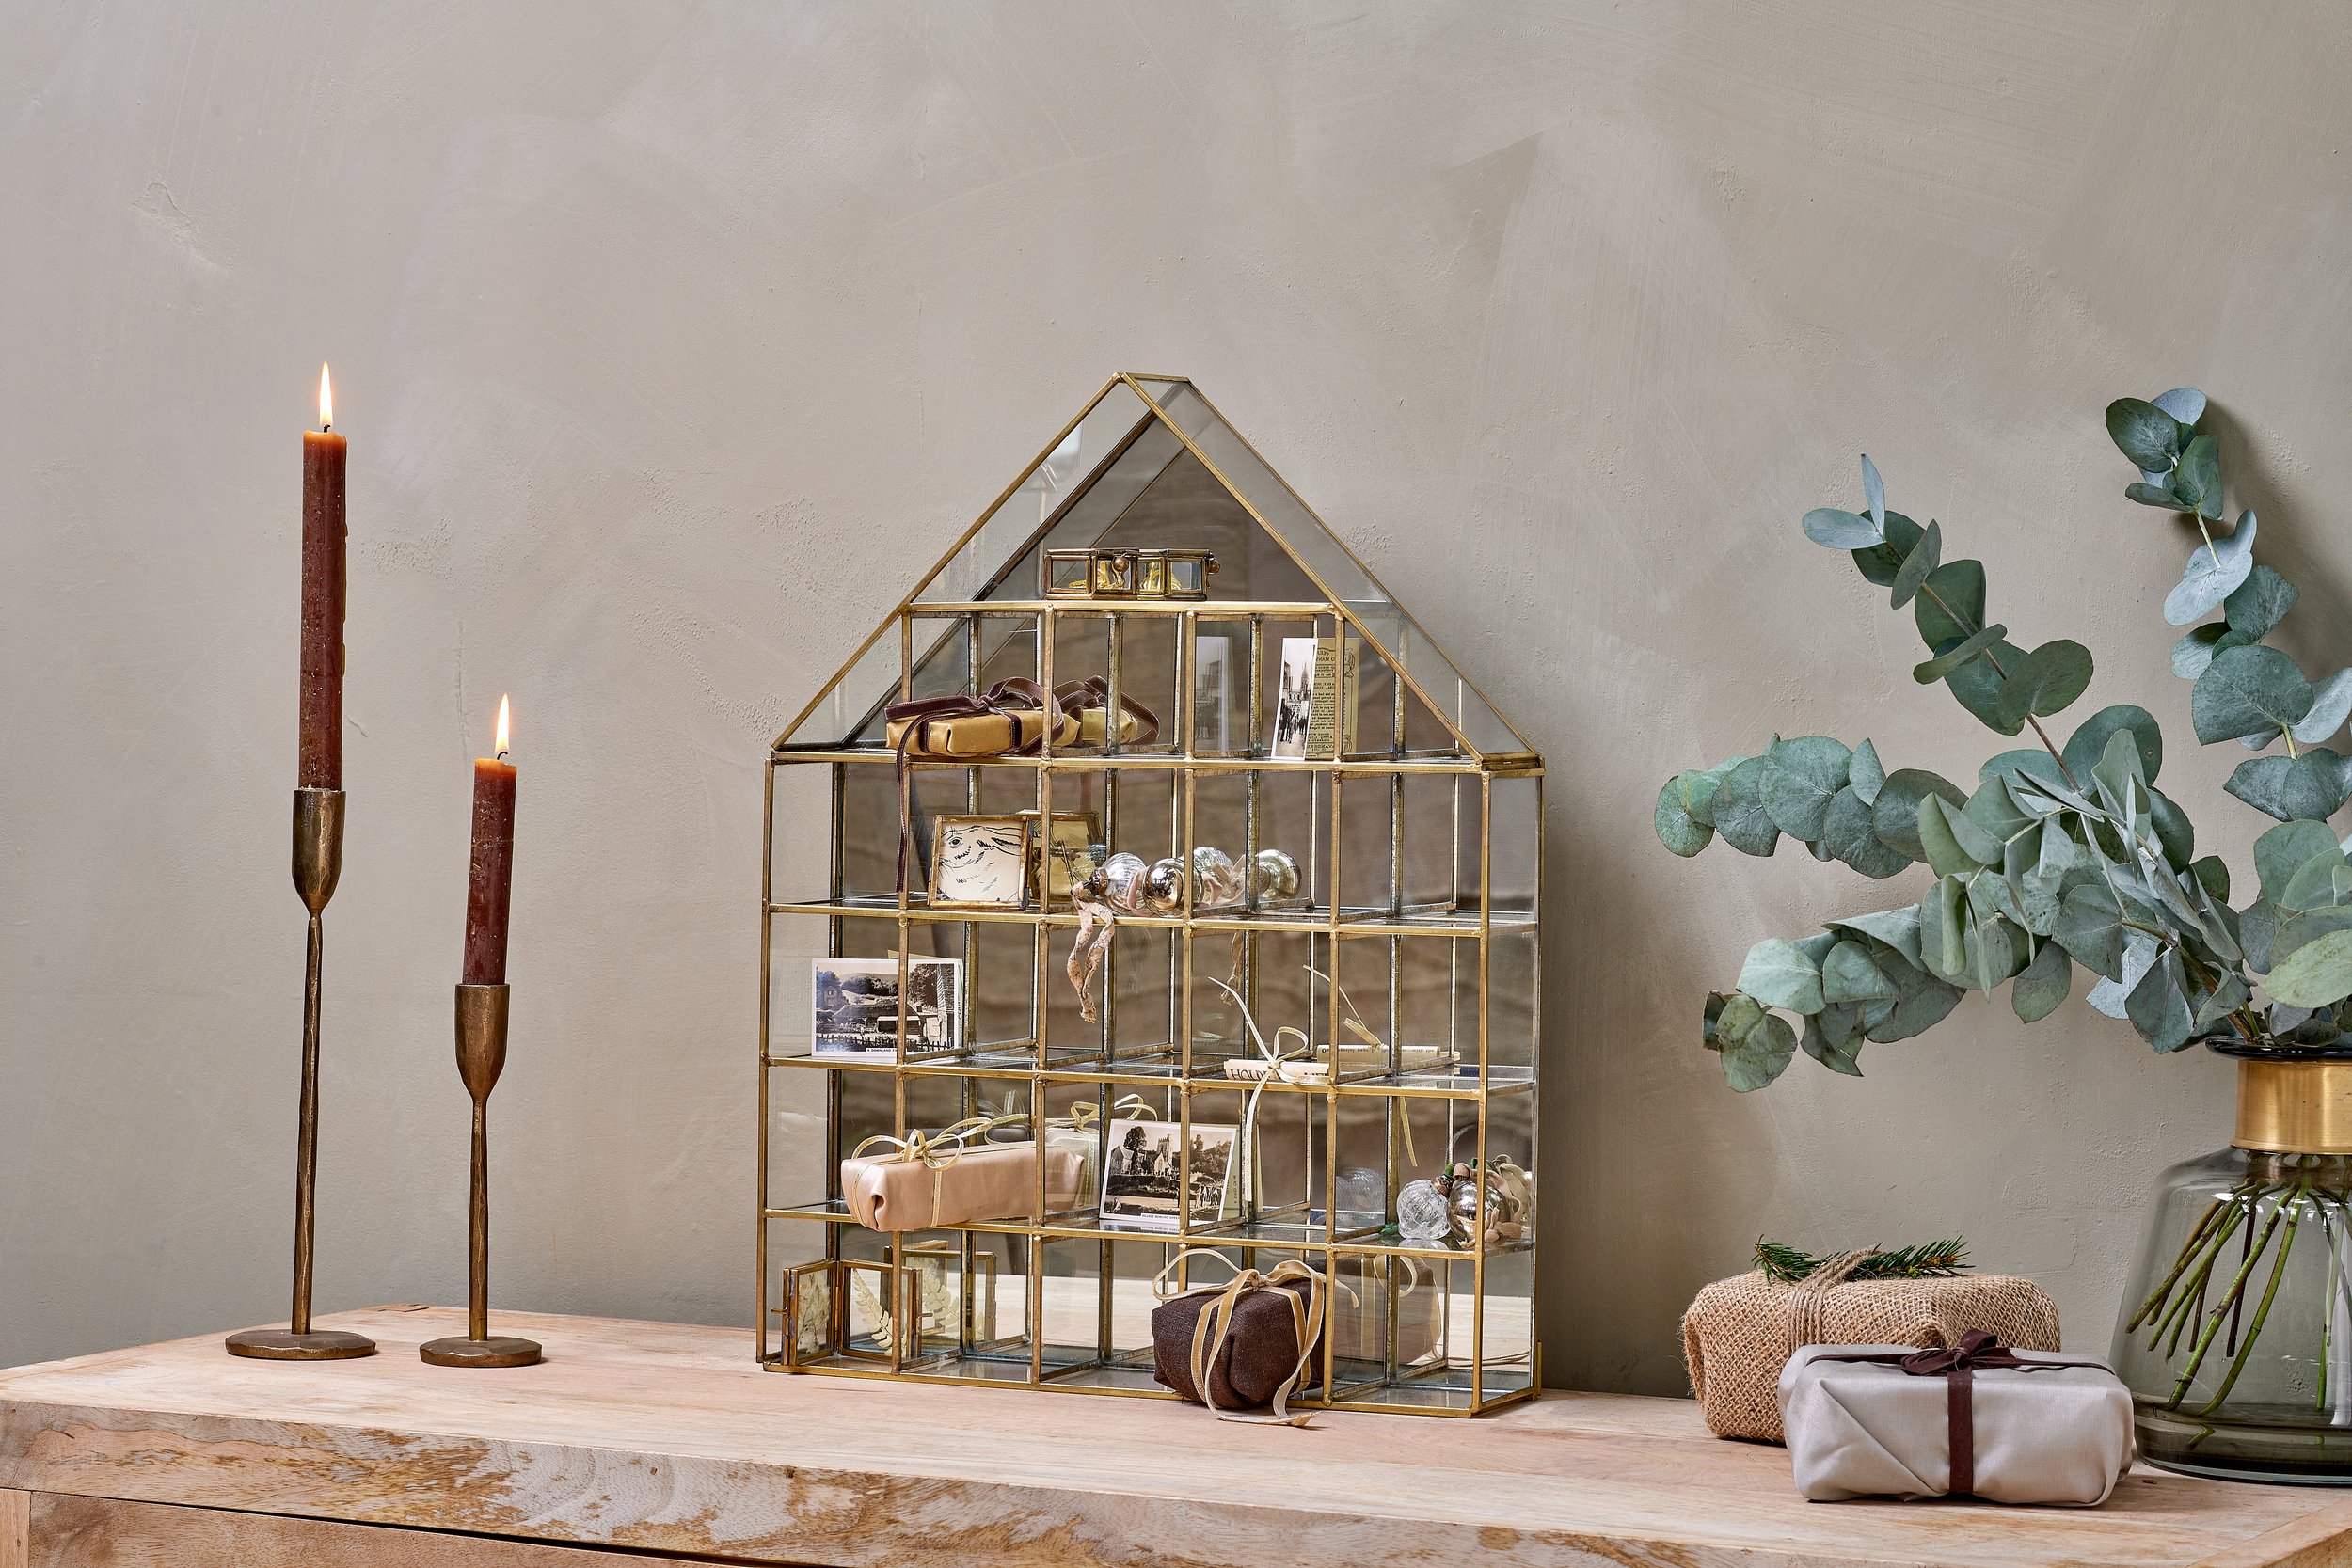 alternative house-shaped advent calendar filled with treats